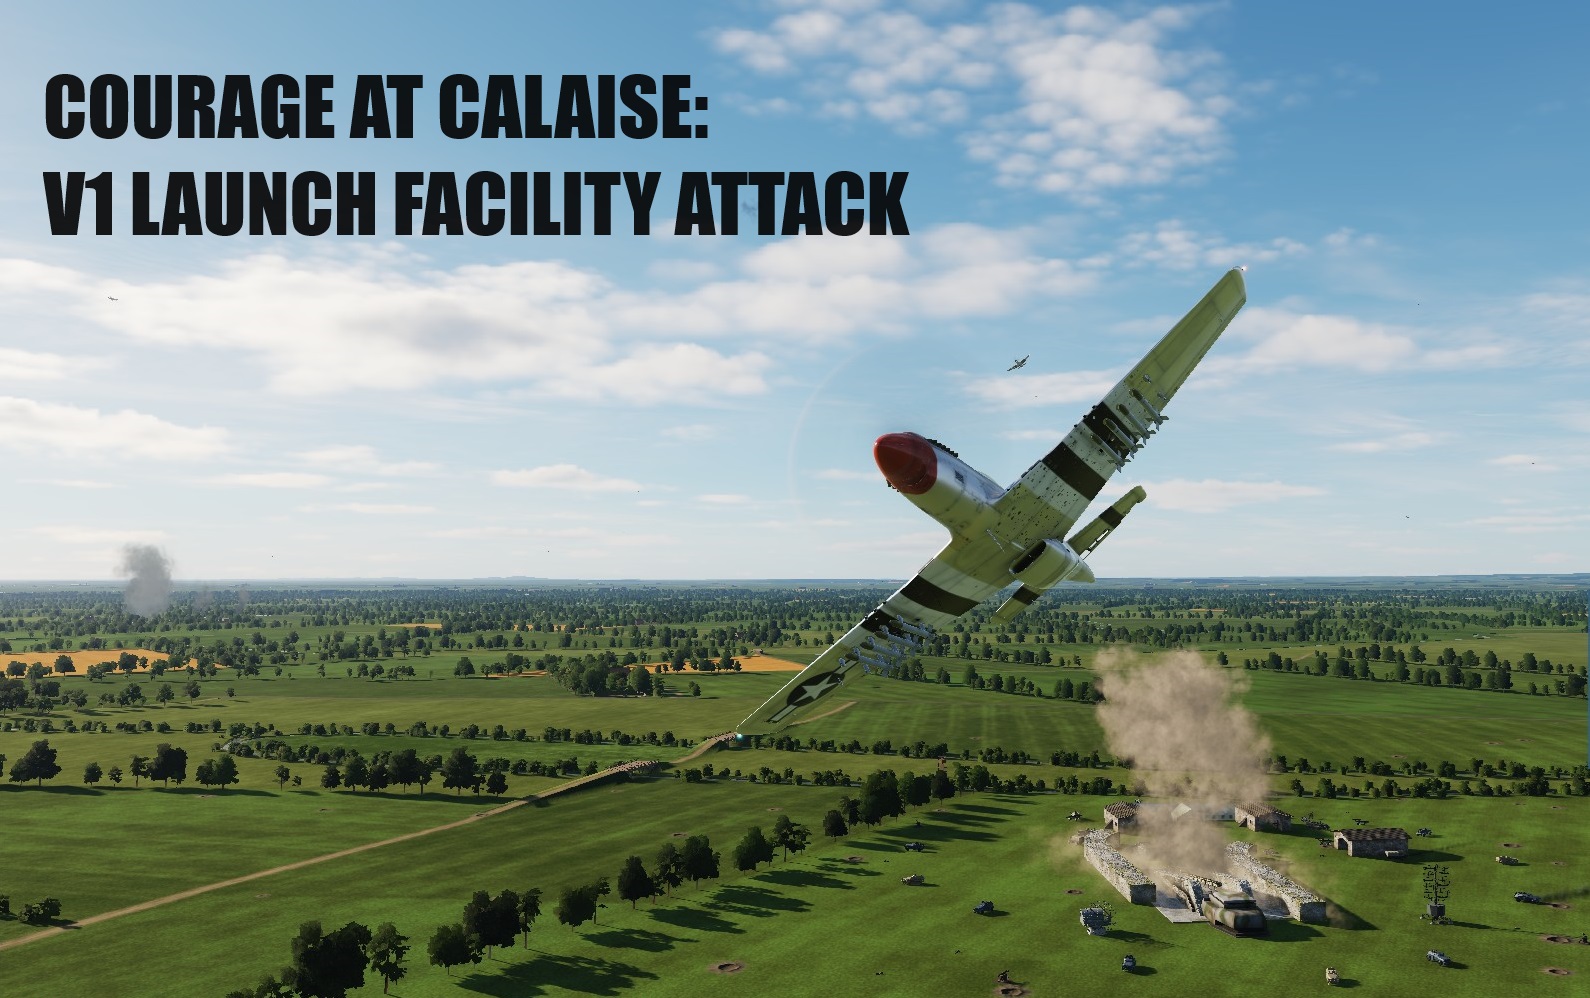 Courage at Calaise: V1 Launch Facility Attack (Fictional)